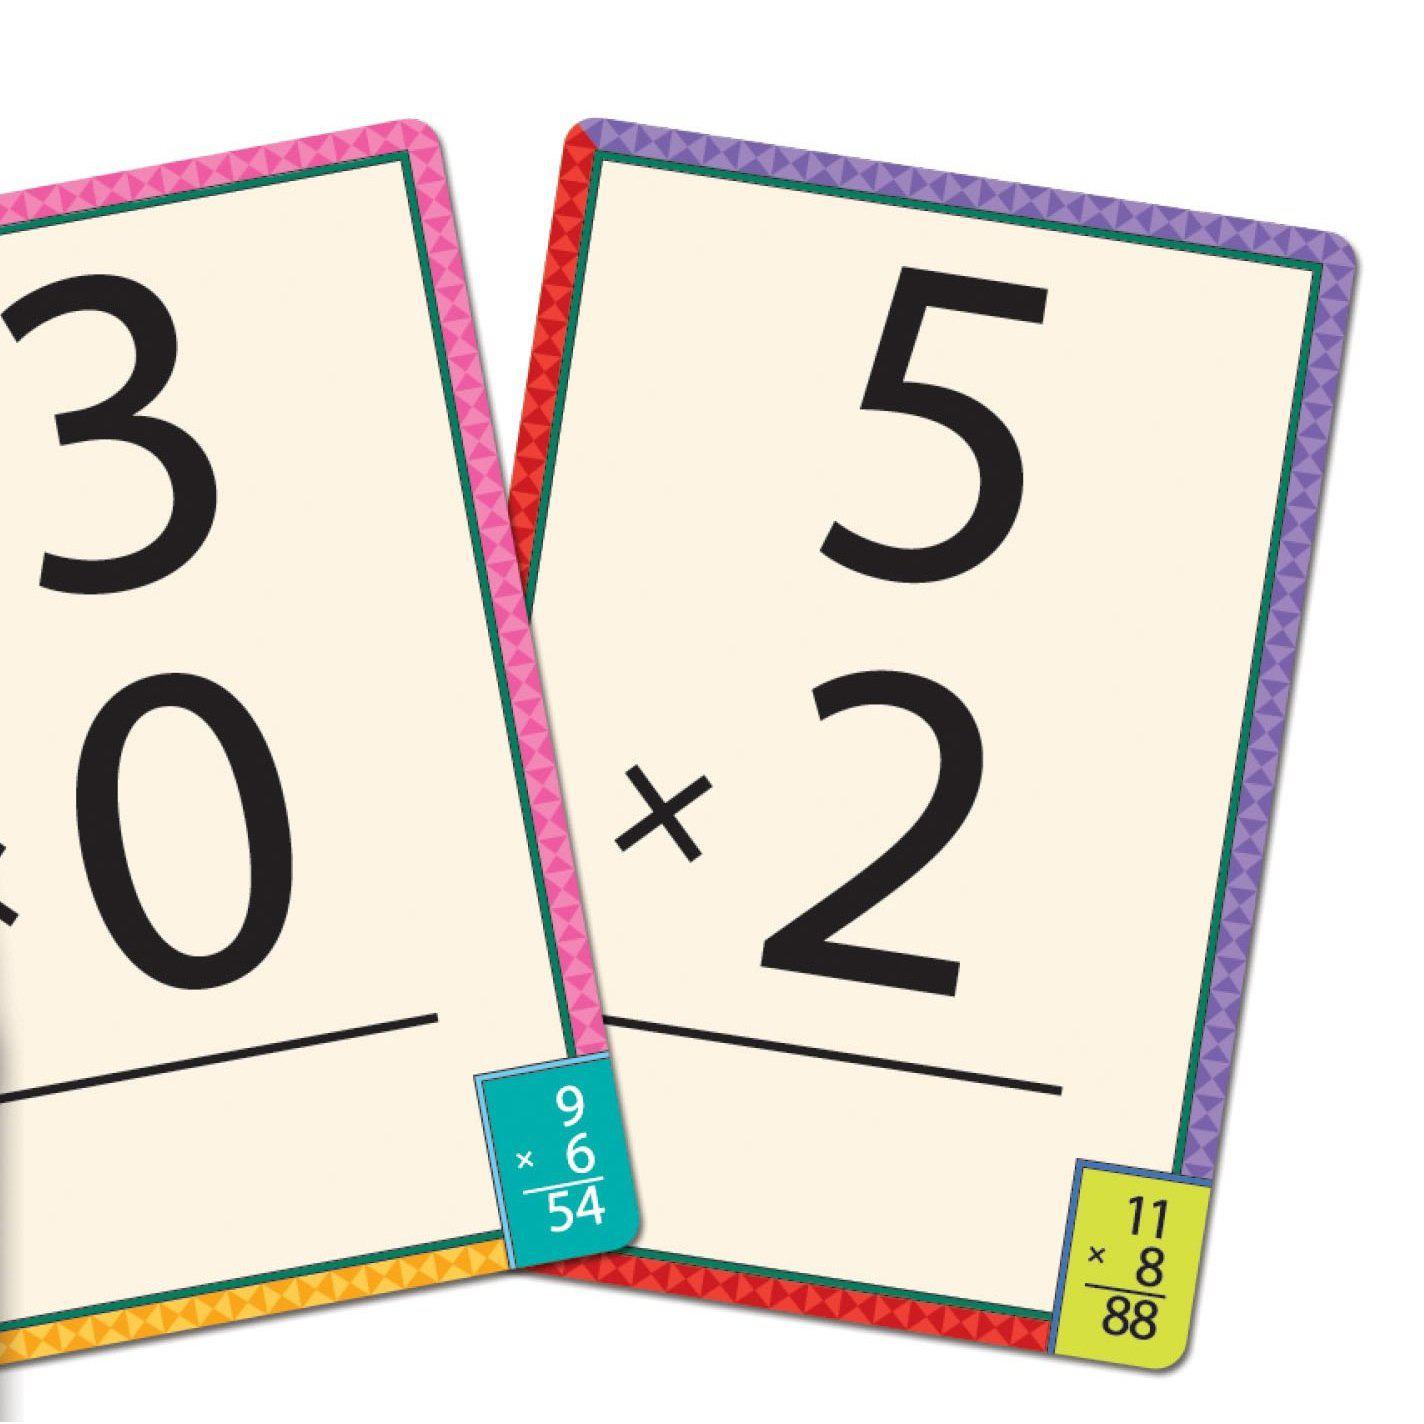 Flash Cards - Multiplication-Science & Discovery-EeBoo-Yellow Springs Toy Company